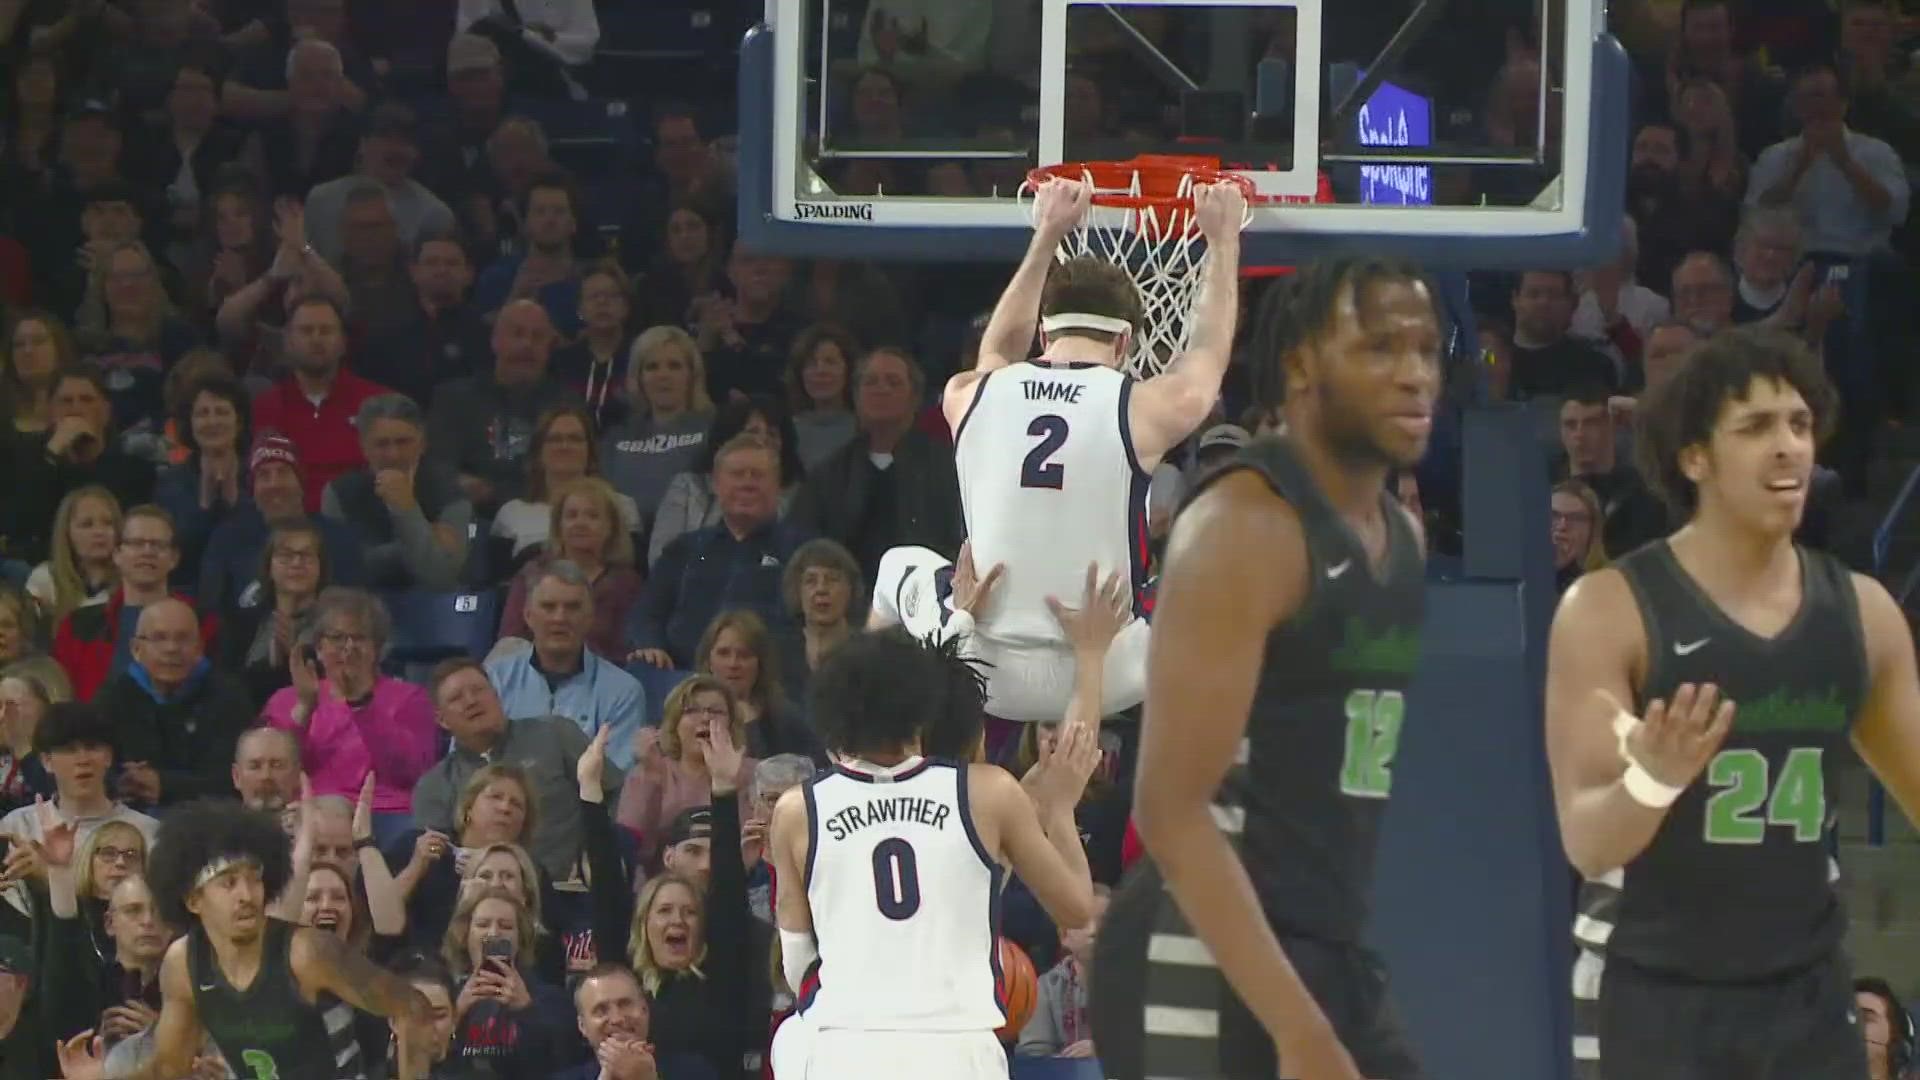 Drew Timme scored 17 points in what’s expected to be his final home game at Gonzaga as the No. 10 ranked Zags took down Chicago State 104-65 at the Kennel.